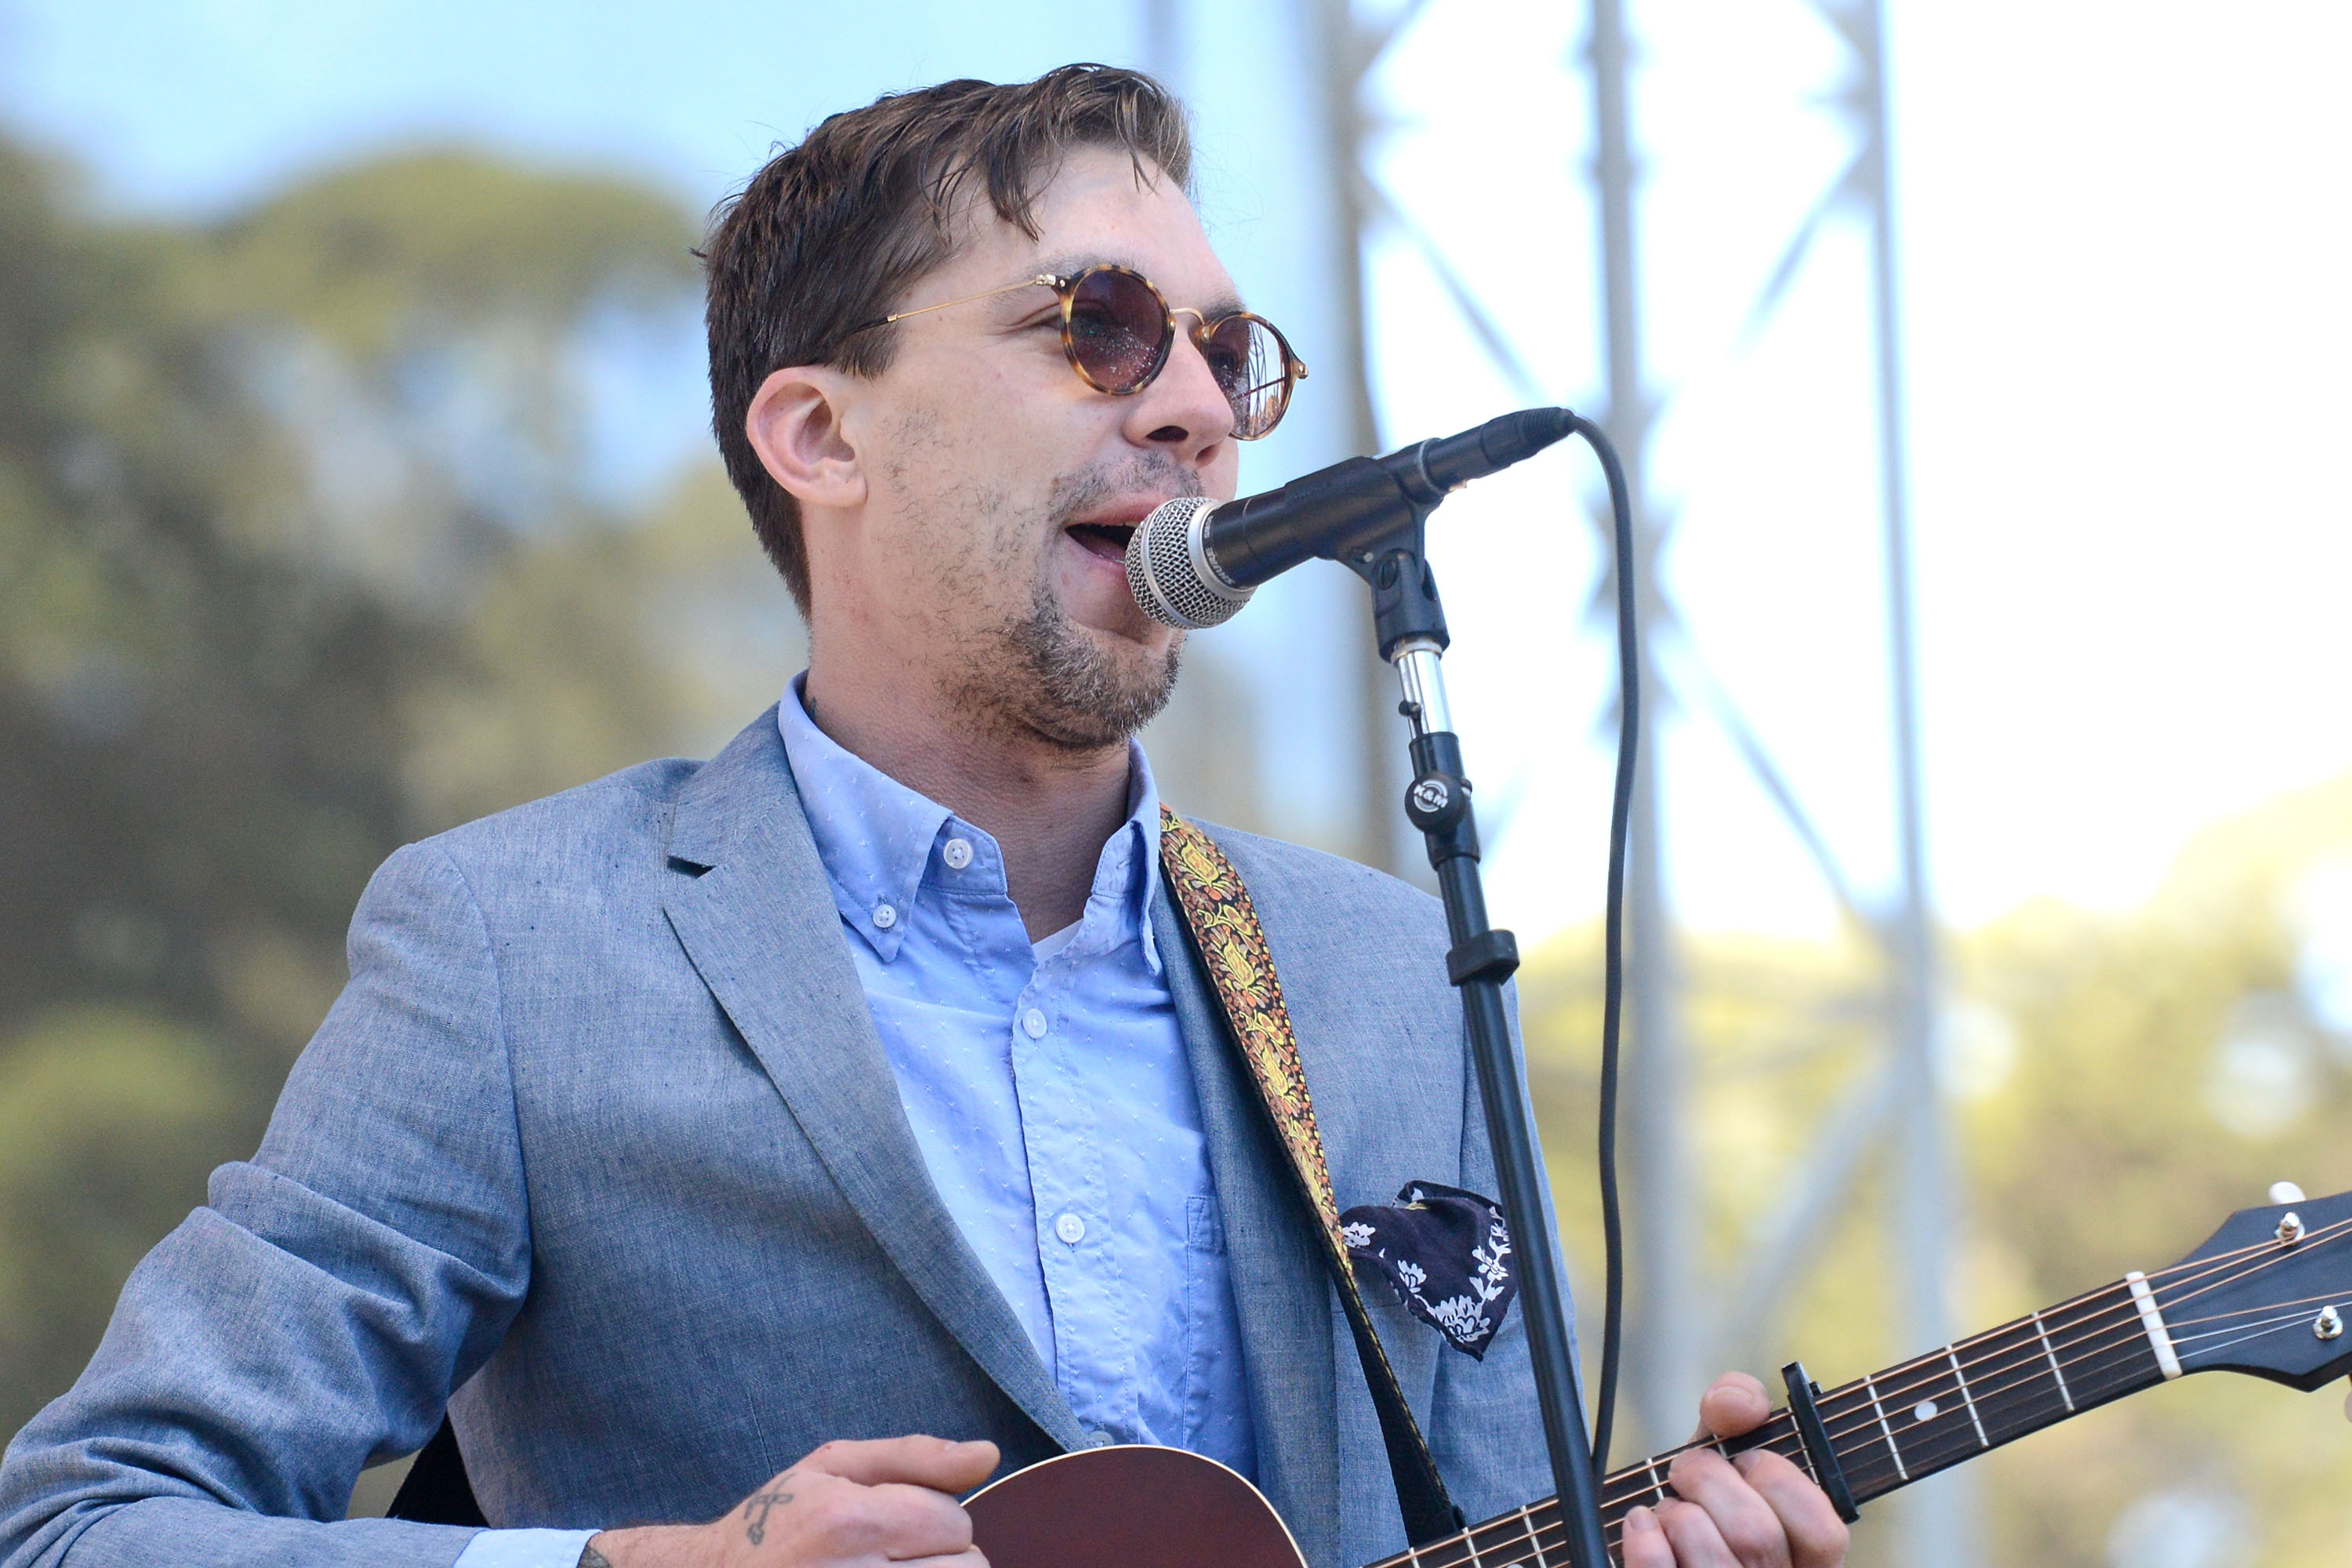 Justin Townes Earle Dead at 38